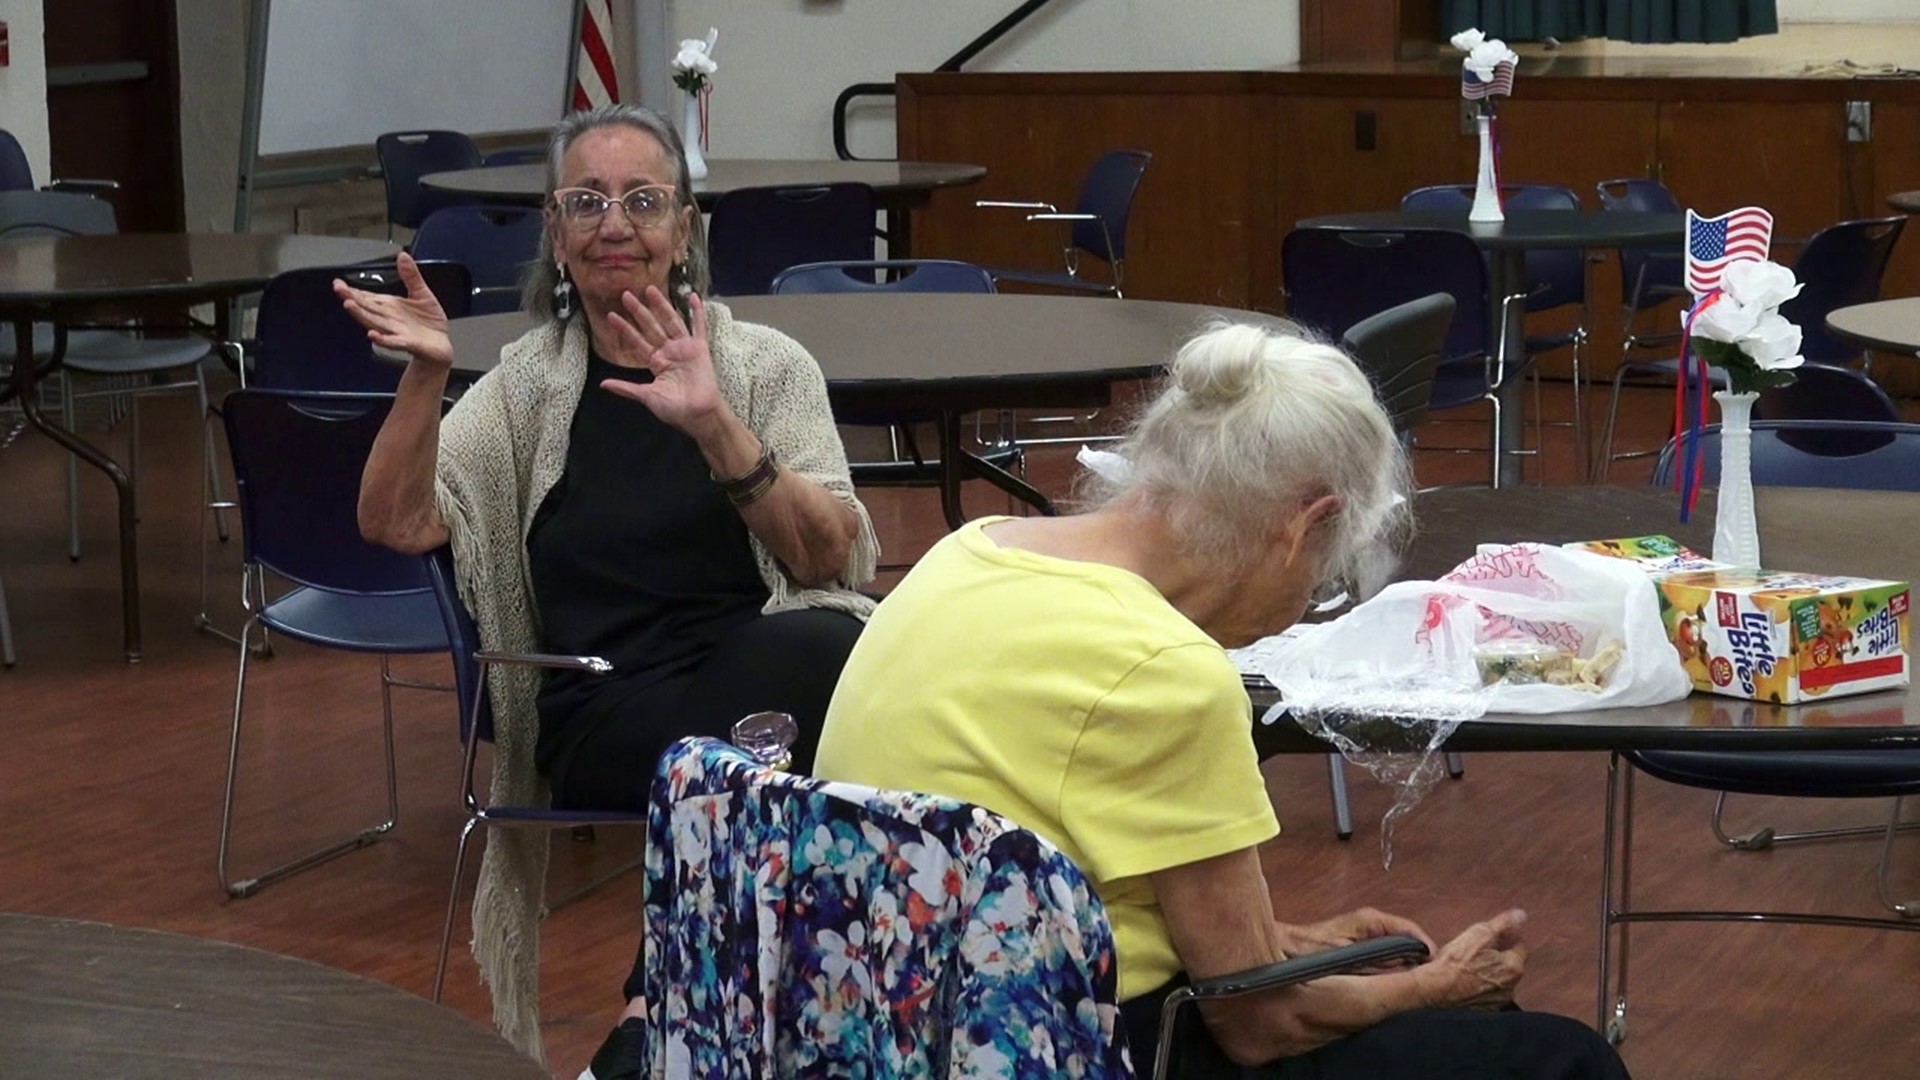 You may be tired of the summer heat, but not everyone is wishing summer days away, especially at the Lackawanna County senior centers.